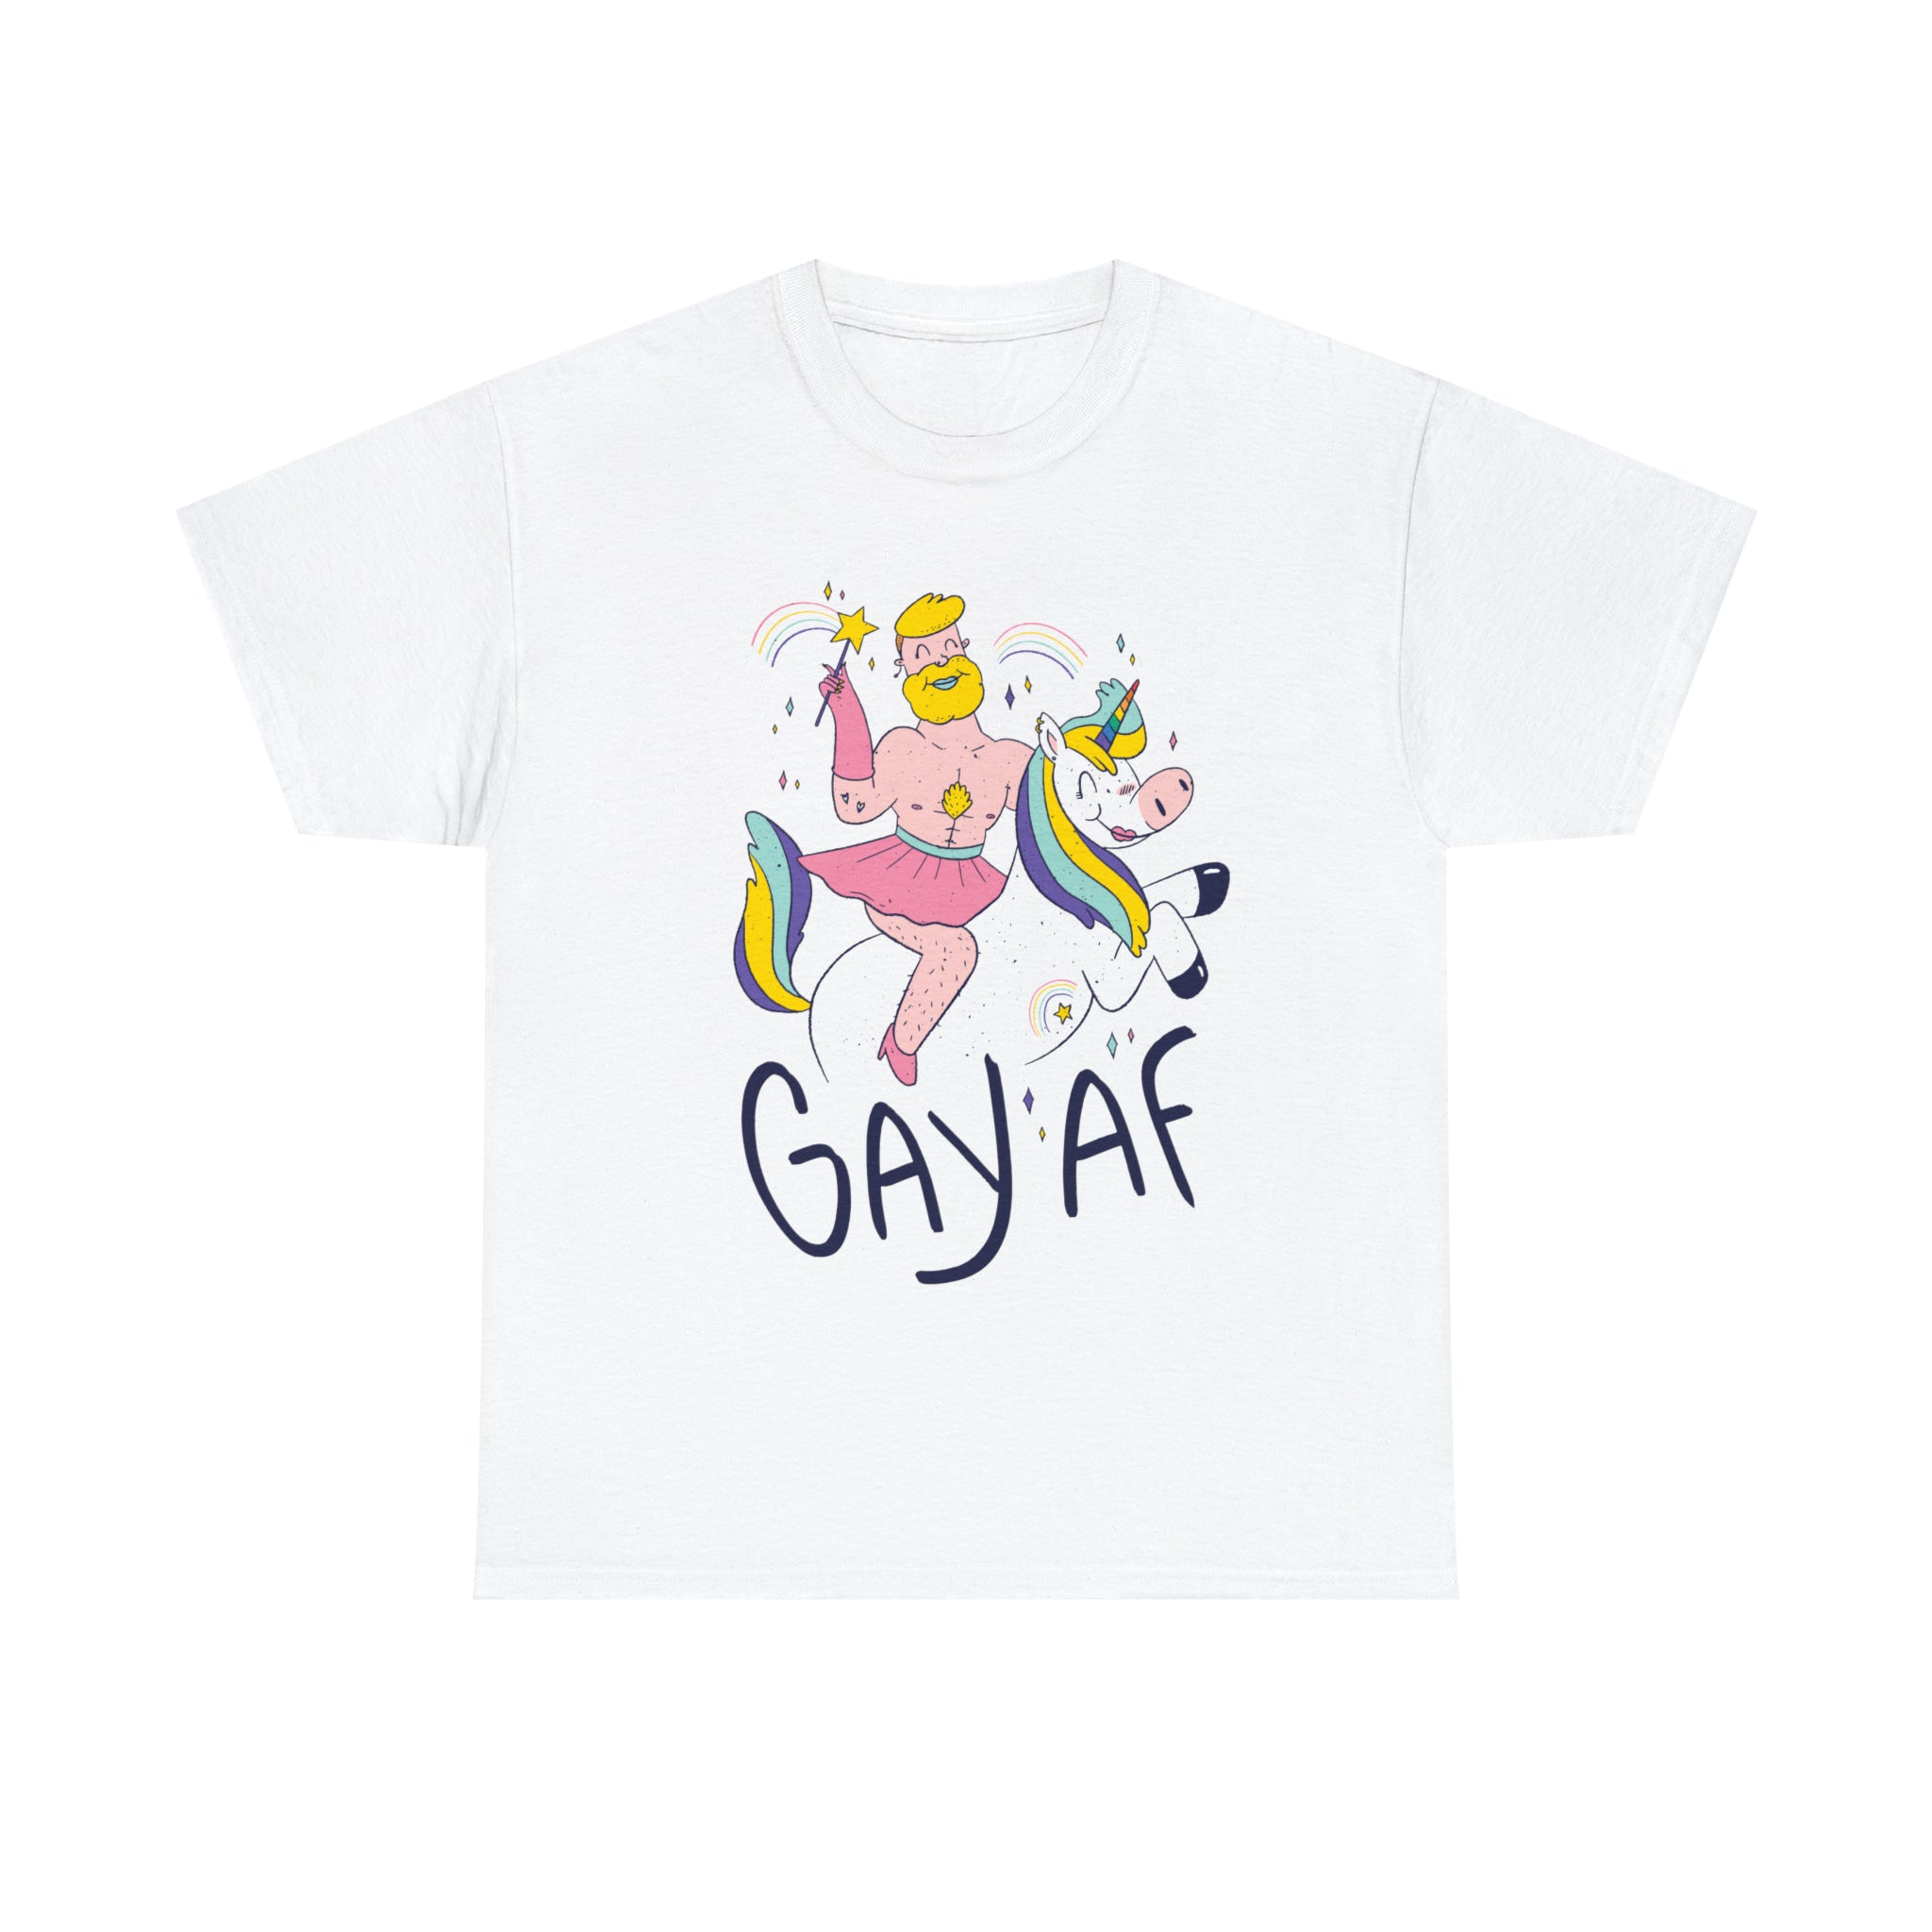 A 100% cotton white GAYAF T-shirt featuring a Geekpsters cartoon character.